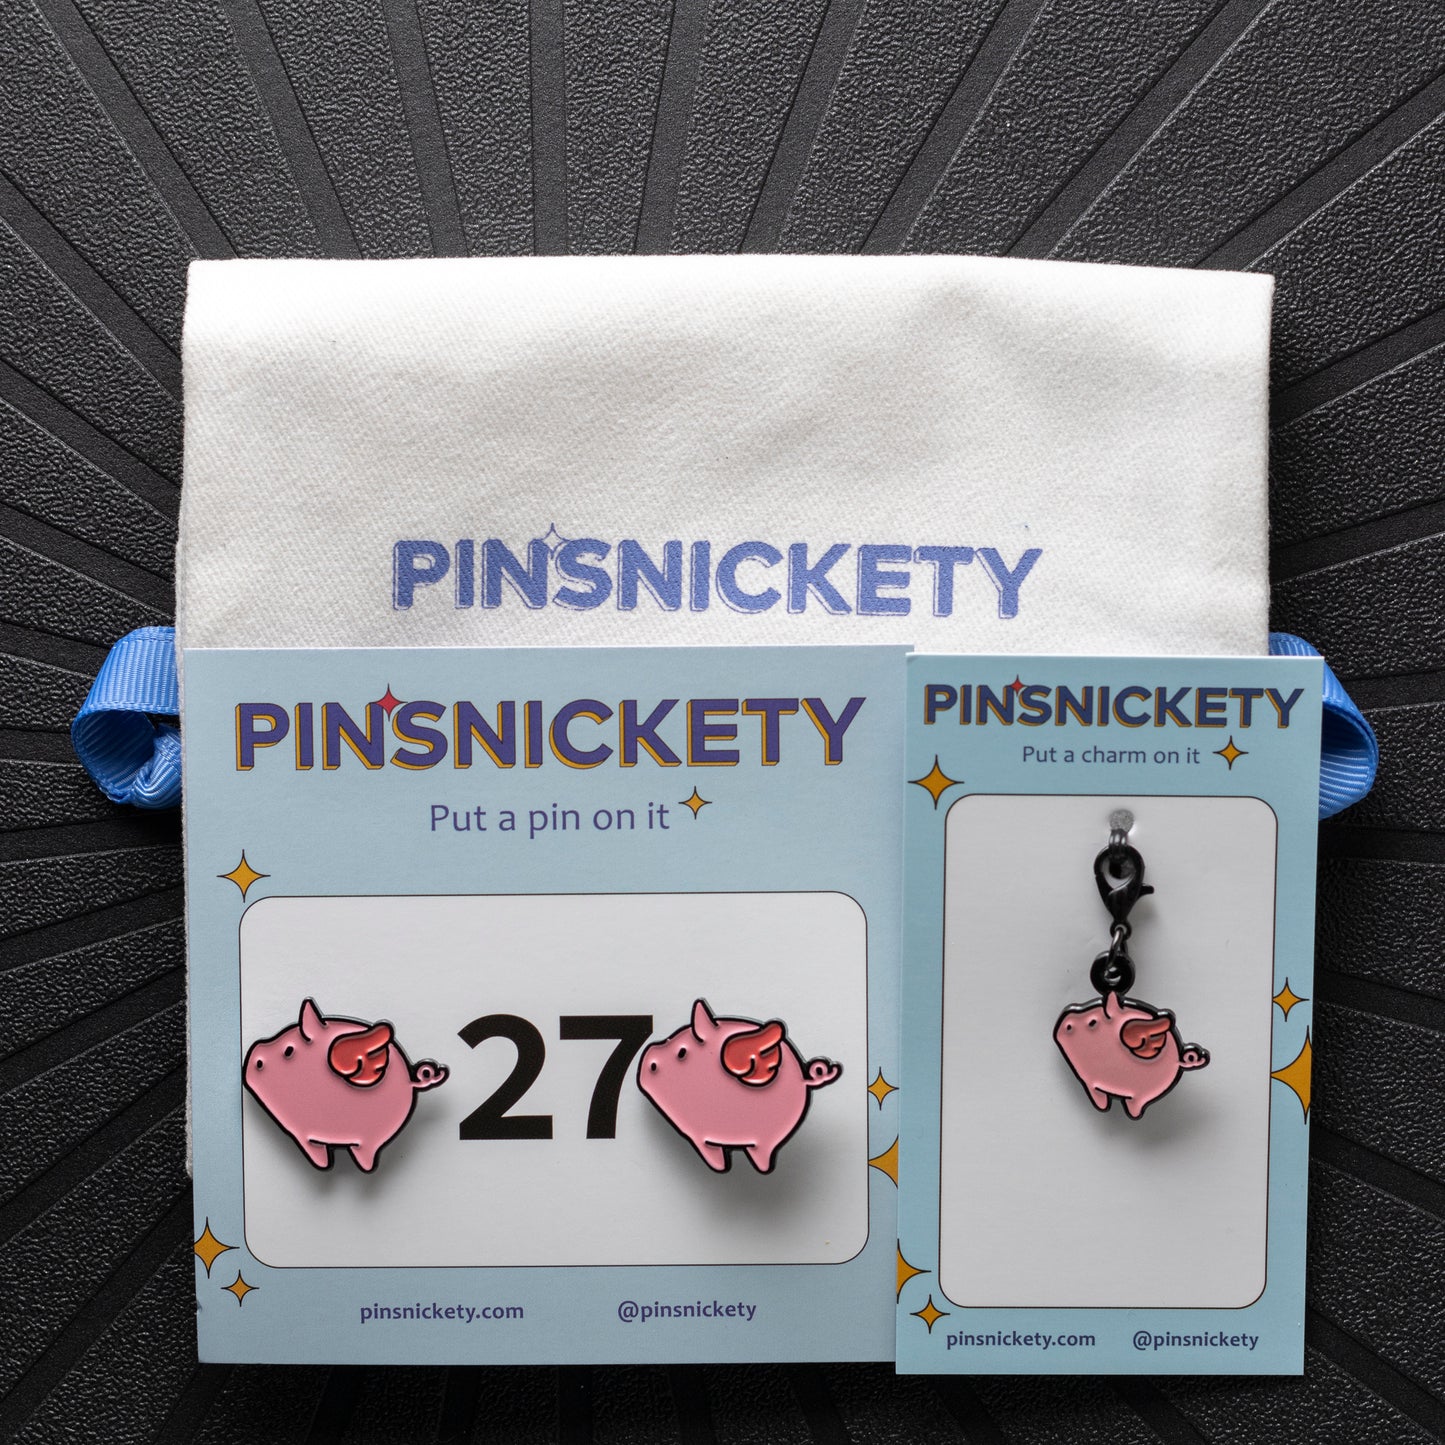 pinsnickety flying pig set, with flying pig horse show number pins, a flying pig braid and bridle charm, and a twill storage bag